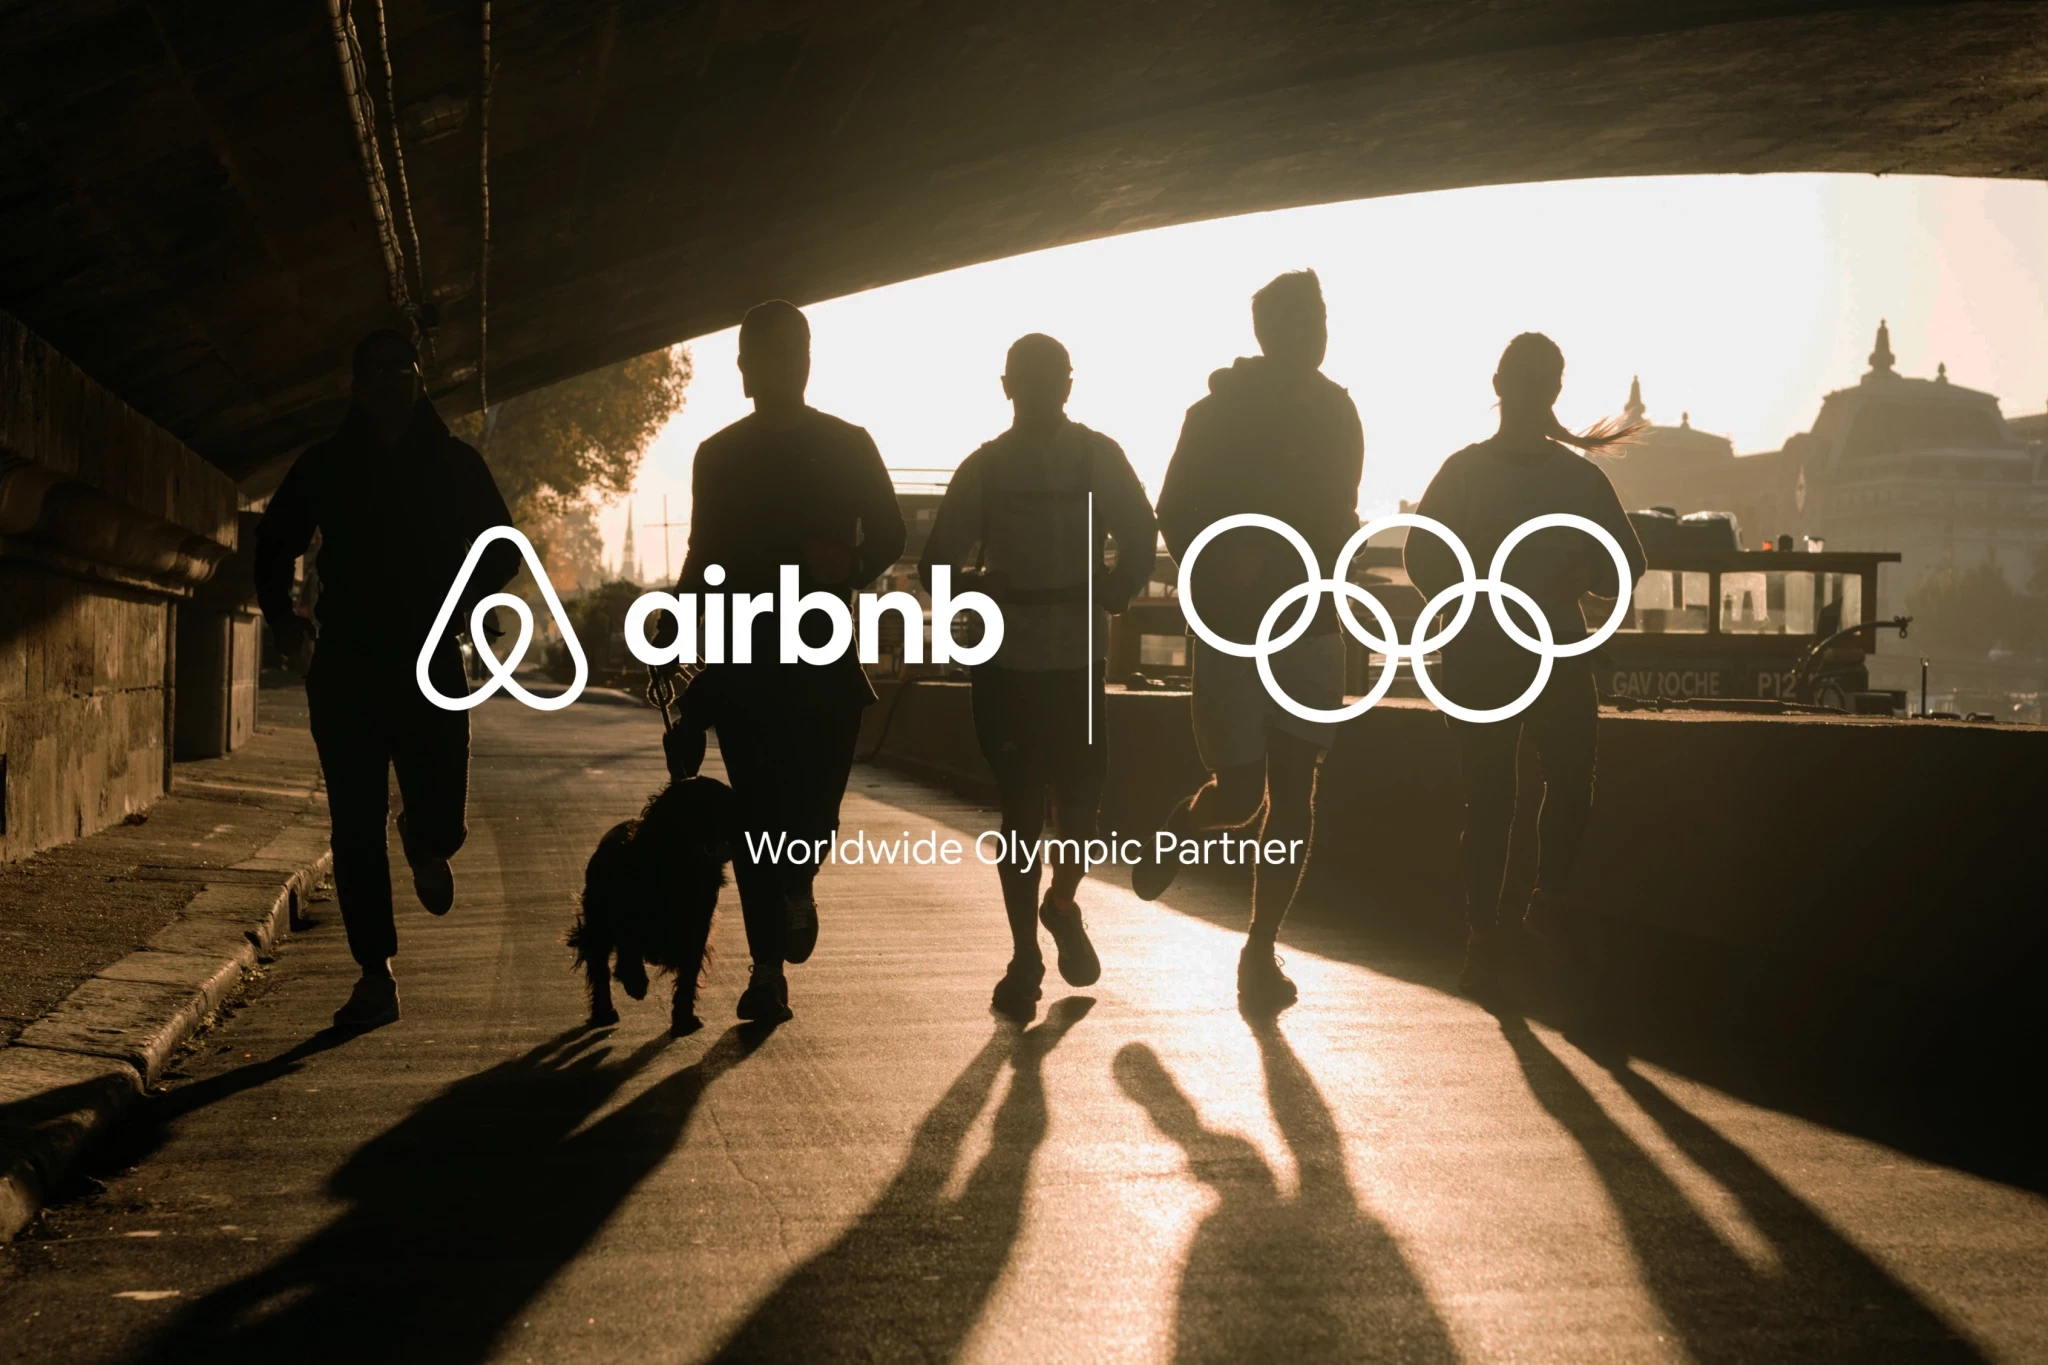 Olympic host city Marseille joins French coalition protesting against IOC sponsor Airbnb